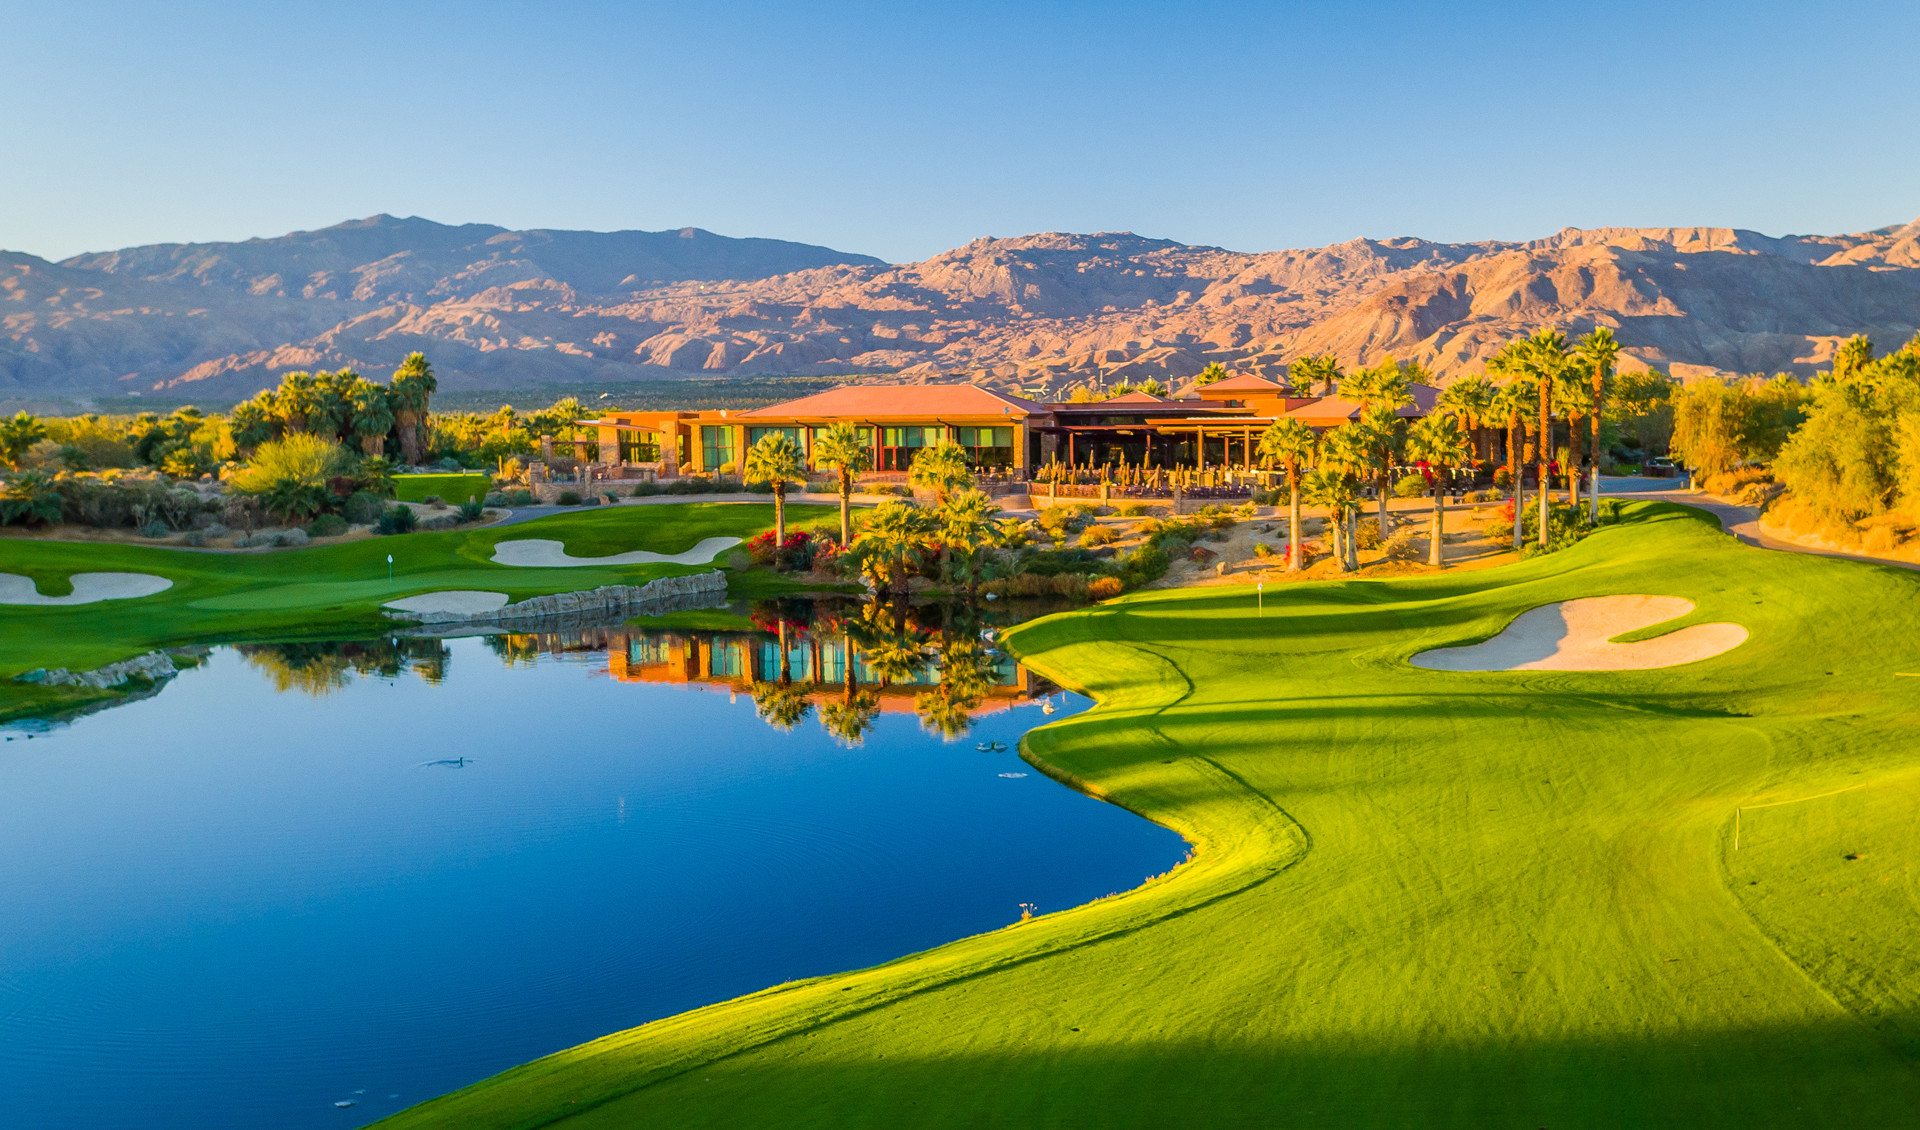 1920x1130 Desert Willow Golf Resort 38-995 Desert Willow Drive | Palm Desert, CA|  92260 (760) 346-0015. Privacy Policy | Terms of Use